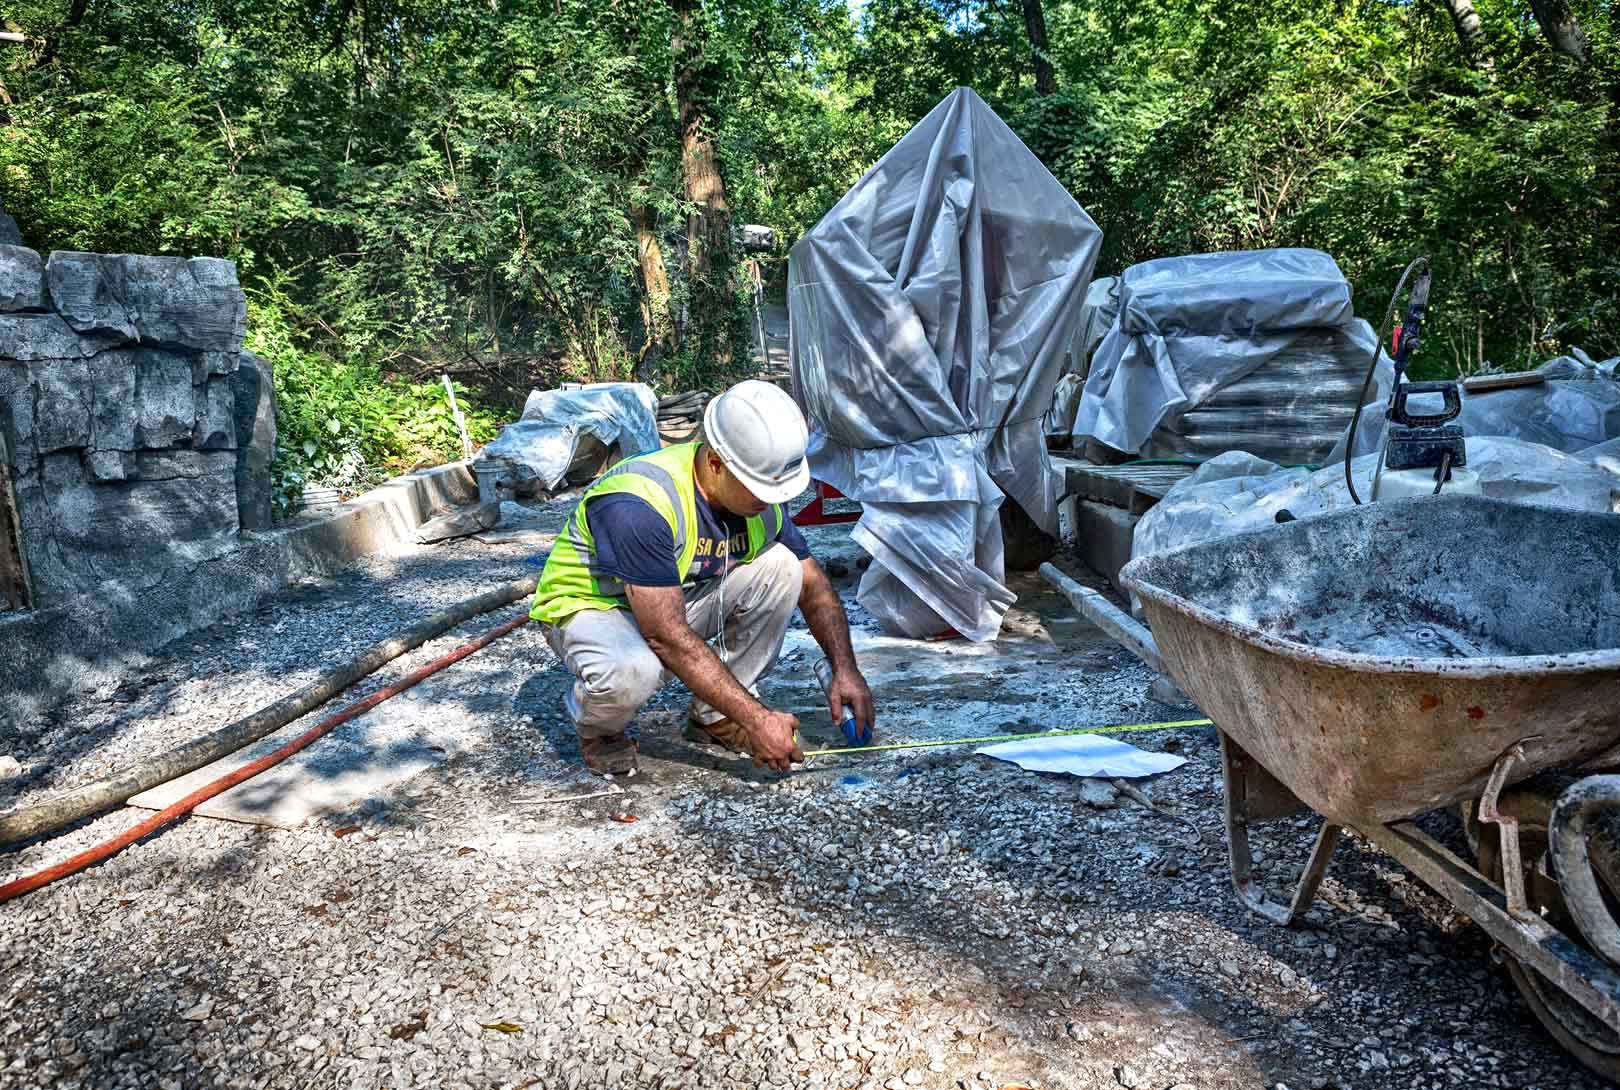 construction worker marking a tape-measured spot with blue spray paint on a gravel path